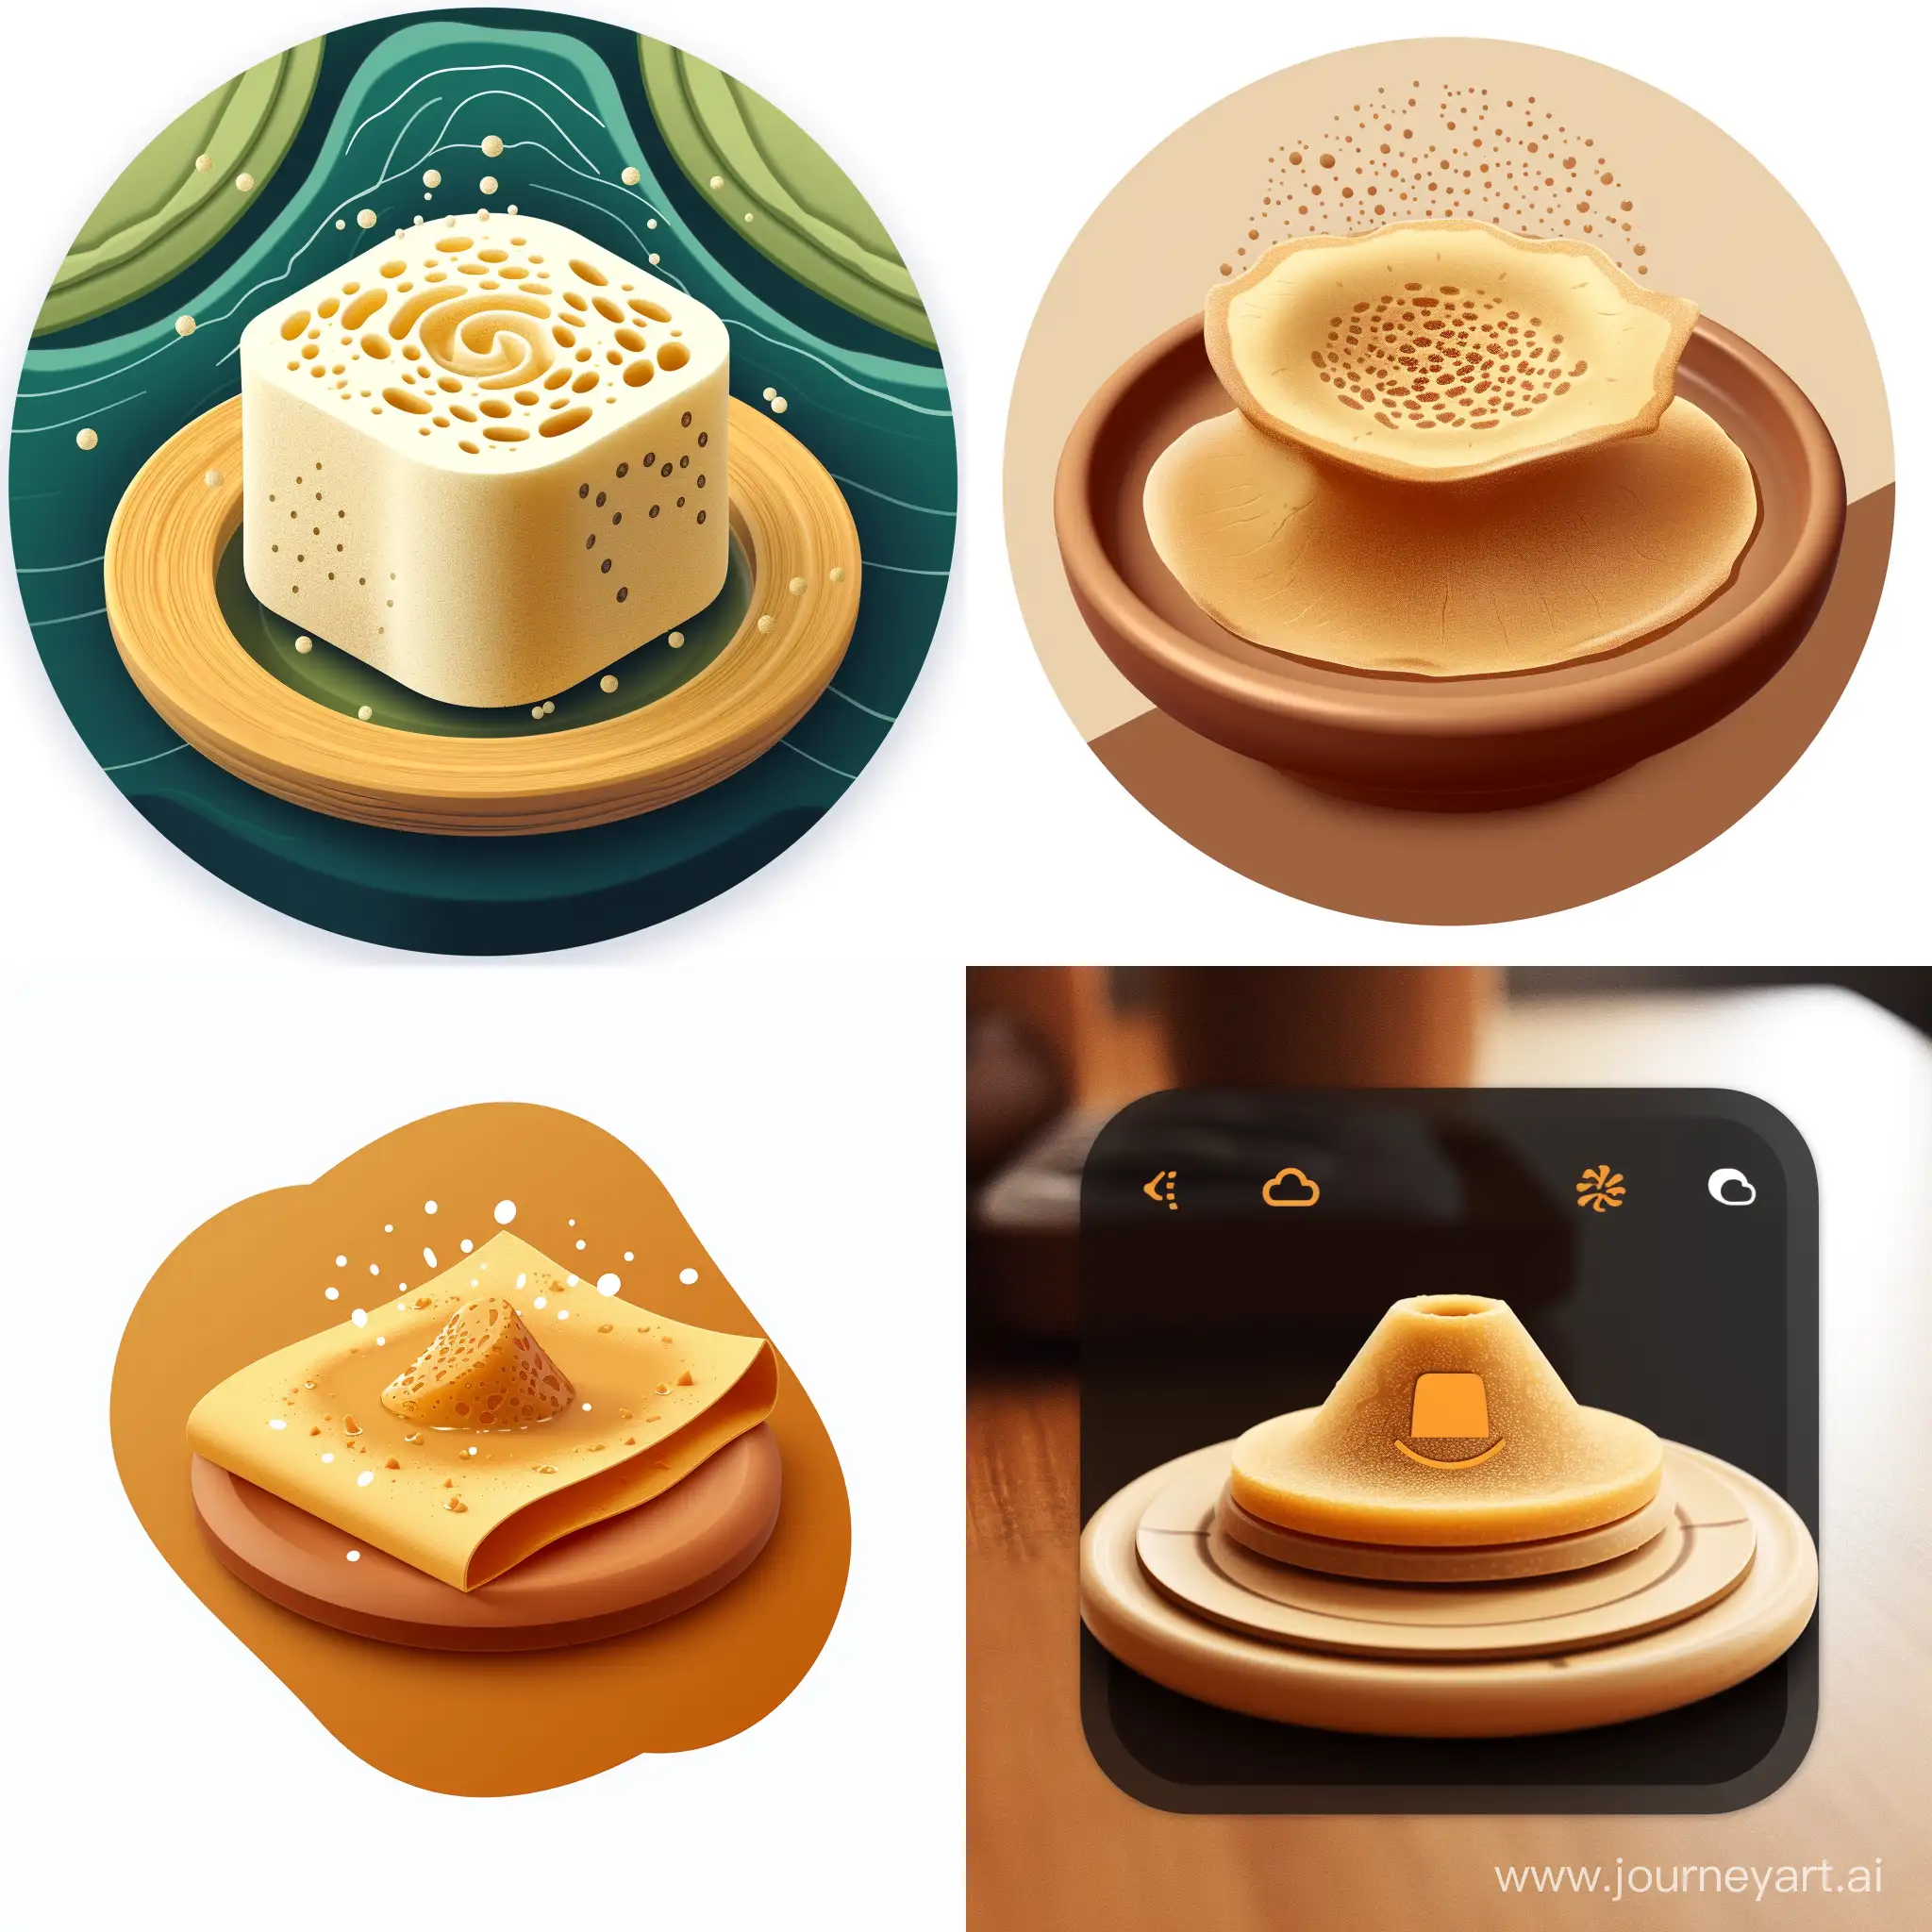 Design an engaging and distinctive app icon for a Flutter application focused on detecting injera mold. The icon should visually convey the app's purpose of mold detection specifically for injera, a traditional Ethiopian flatbread which is made by plate in which it's build using clay. Incorporate elements that represent both the cultural significance of injera and the advanced technology behind the mold detection feature. Capture the essence of cleanliness, precision, and technology, ensuring the icon is eye-catching and easily recognizable on mobile devices.